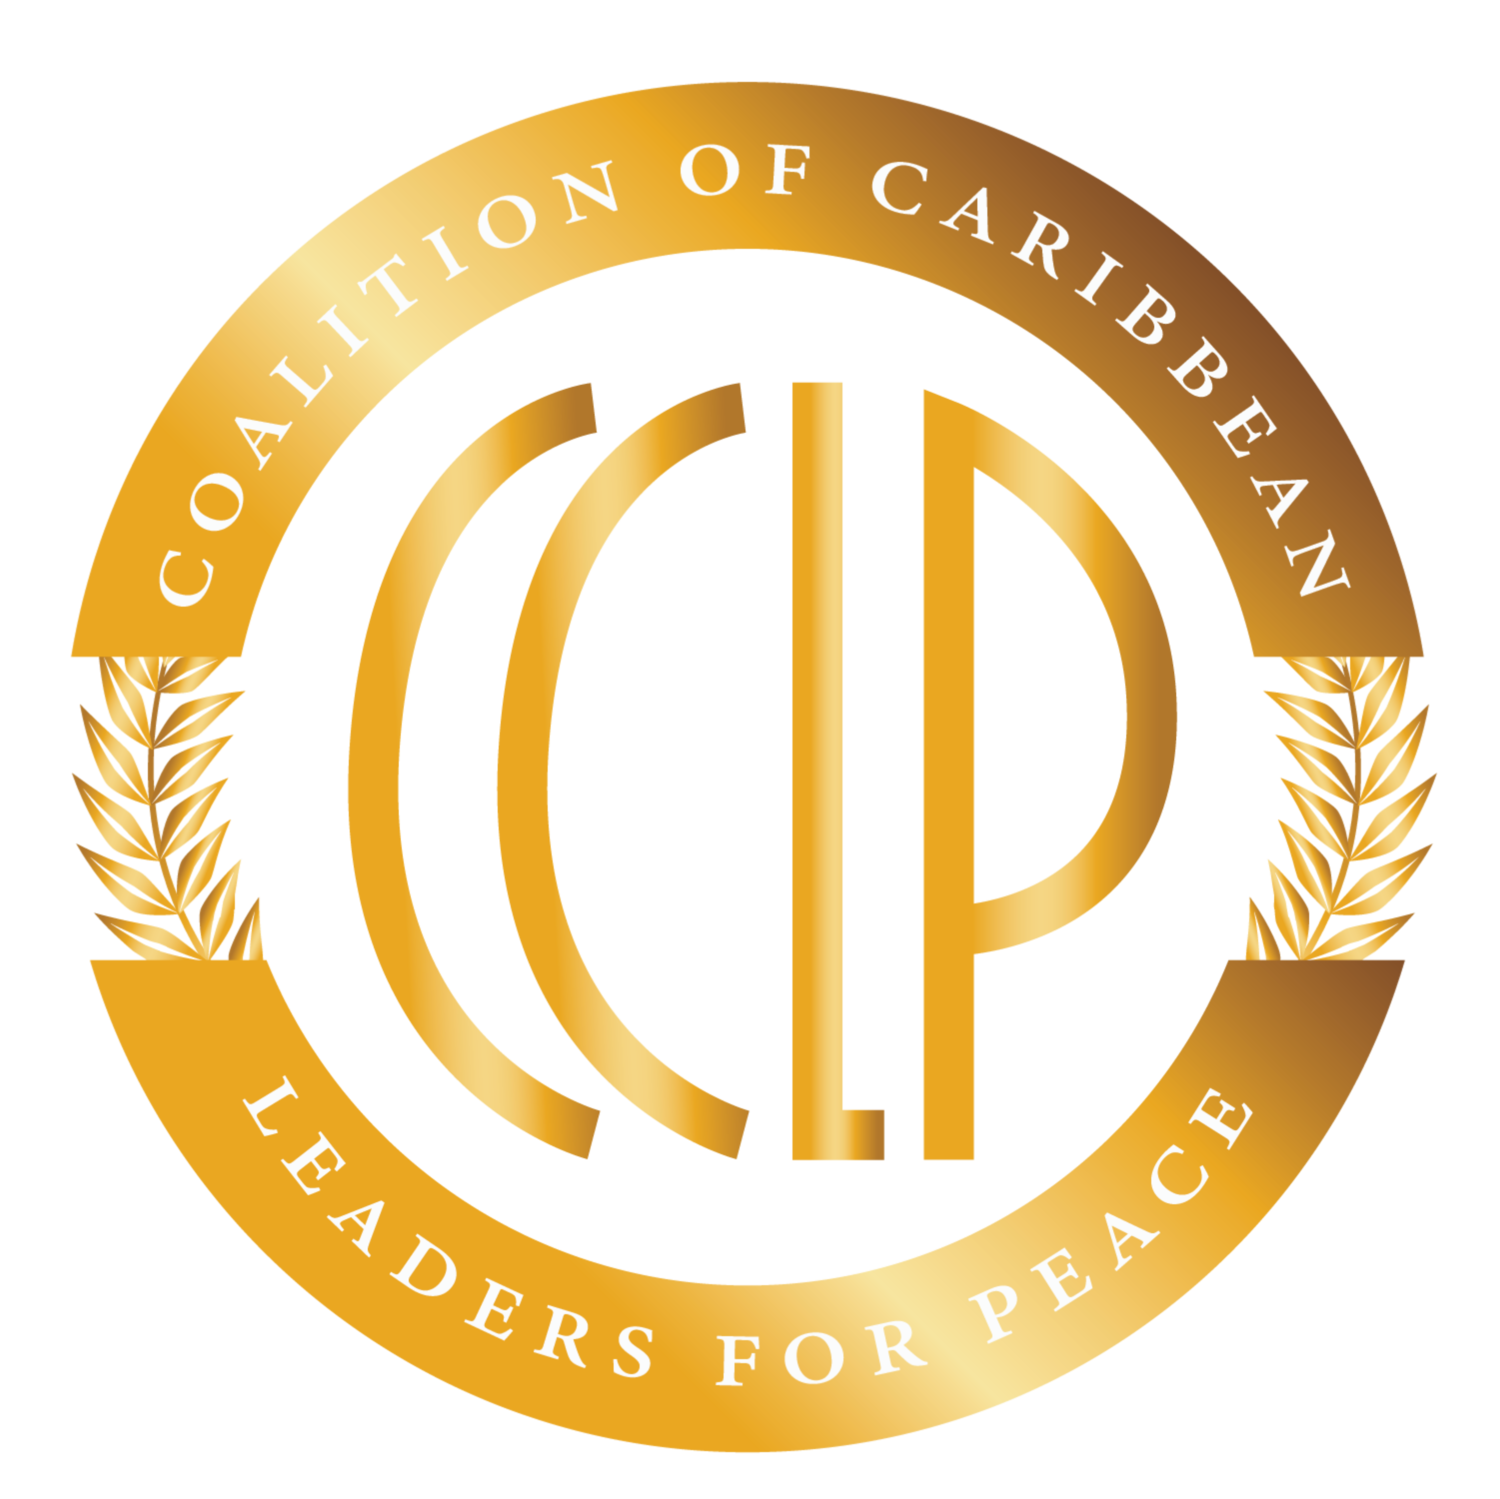 Coalition of Caribbean Leaders for Peace  CCLP